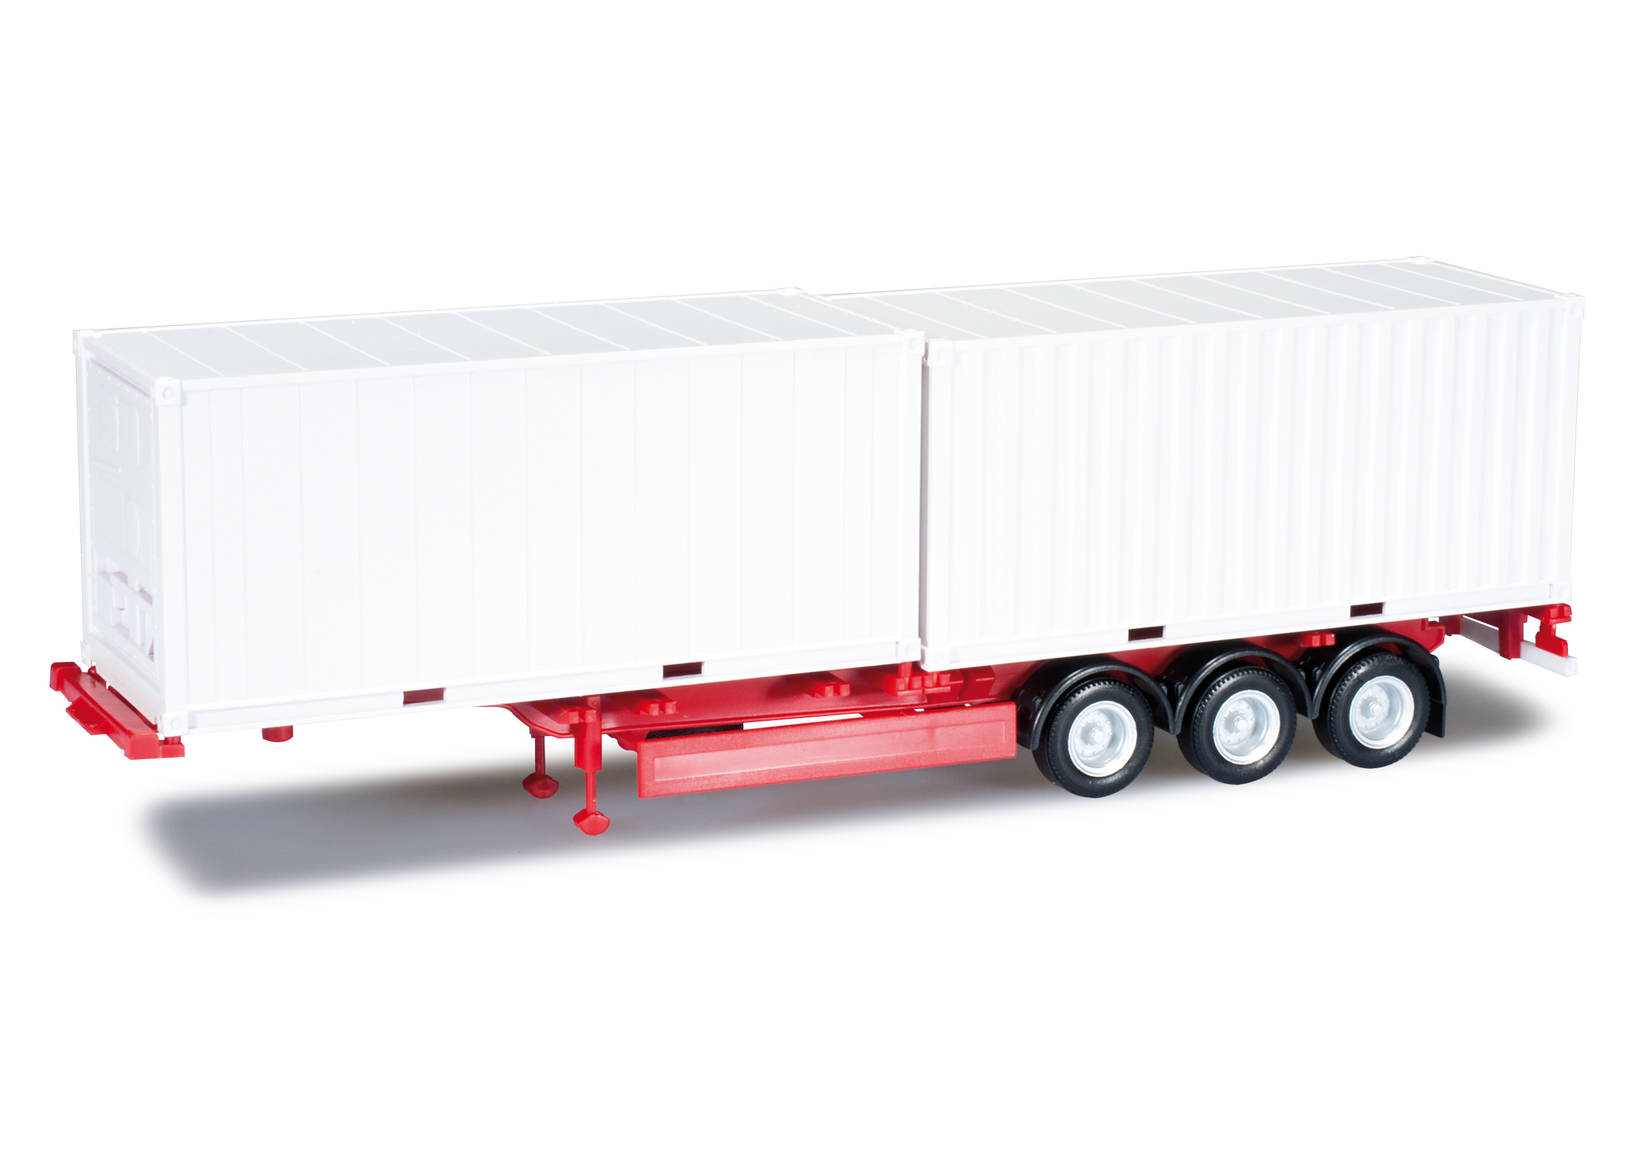 40 ft. Containerchassis Krone with 2 x 20 ft. Container